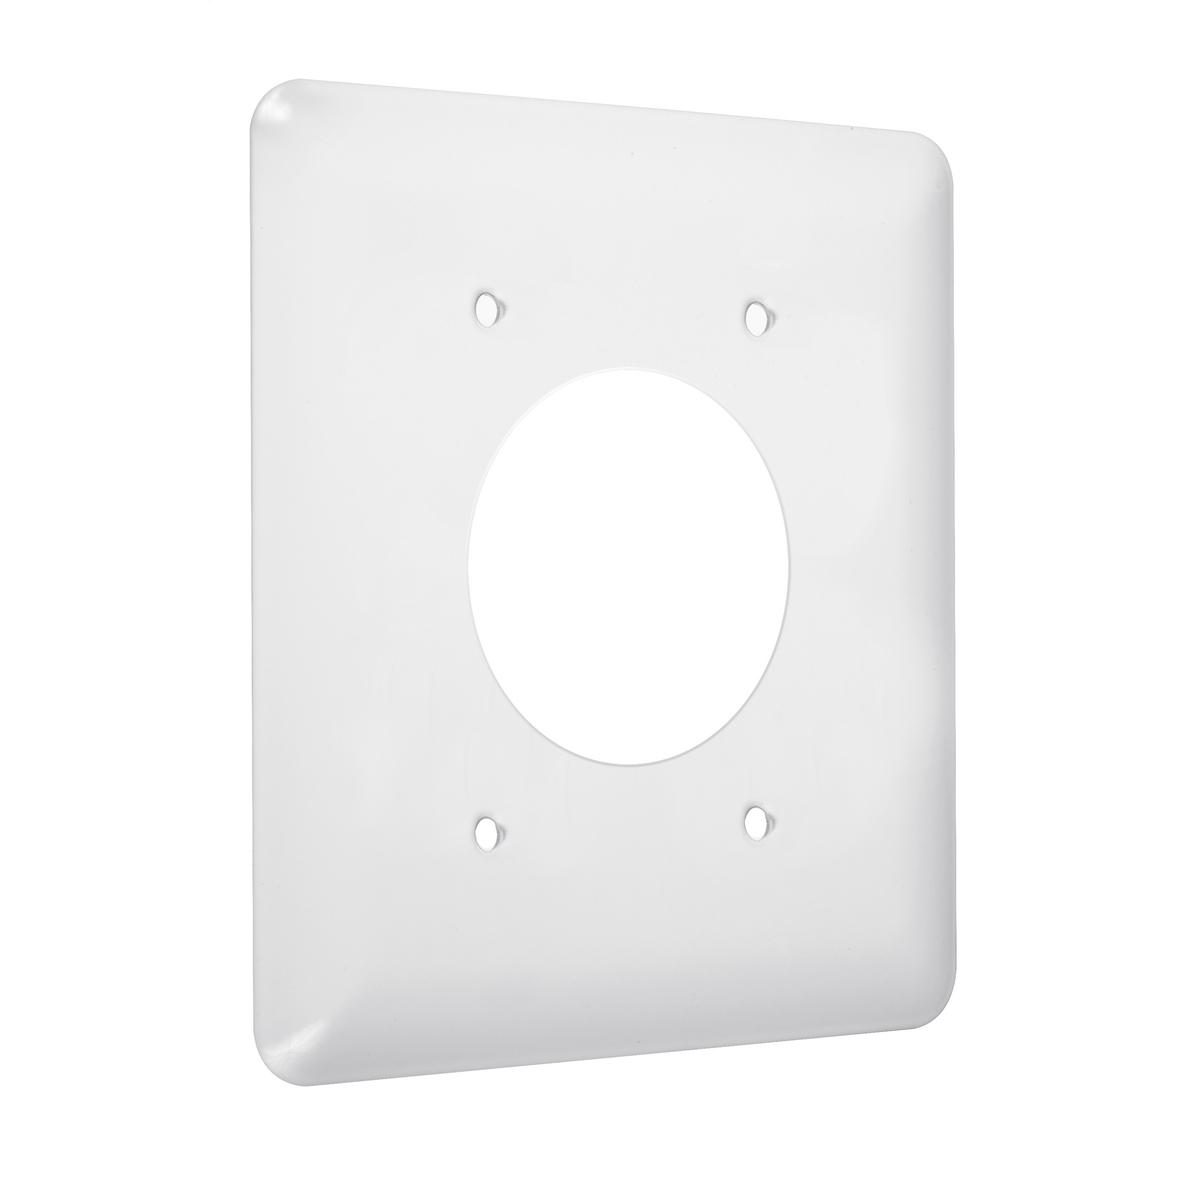 Hubbell WRW2-2 2-Gang Metal Wallplate, Maxi, Single Receptacle 2.15 in. ,White Smooth  ; Easily primed and painted to match or complement walls. ; Won't bow, crack or distort during installation. ; Premium North American powder coat. ; Includes screw(s) in matching fini